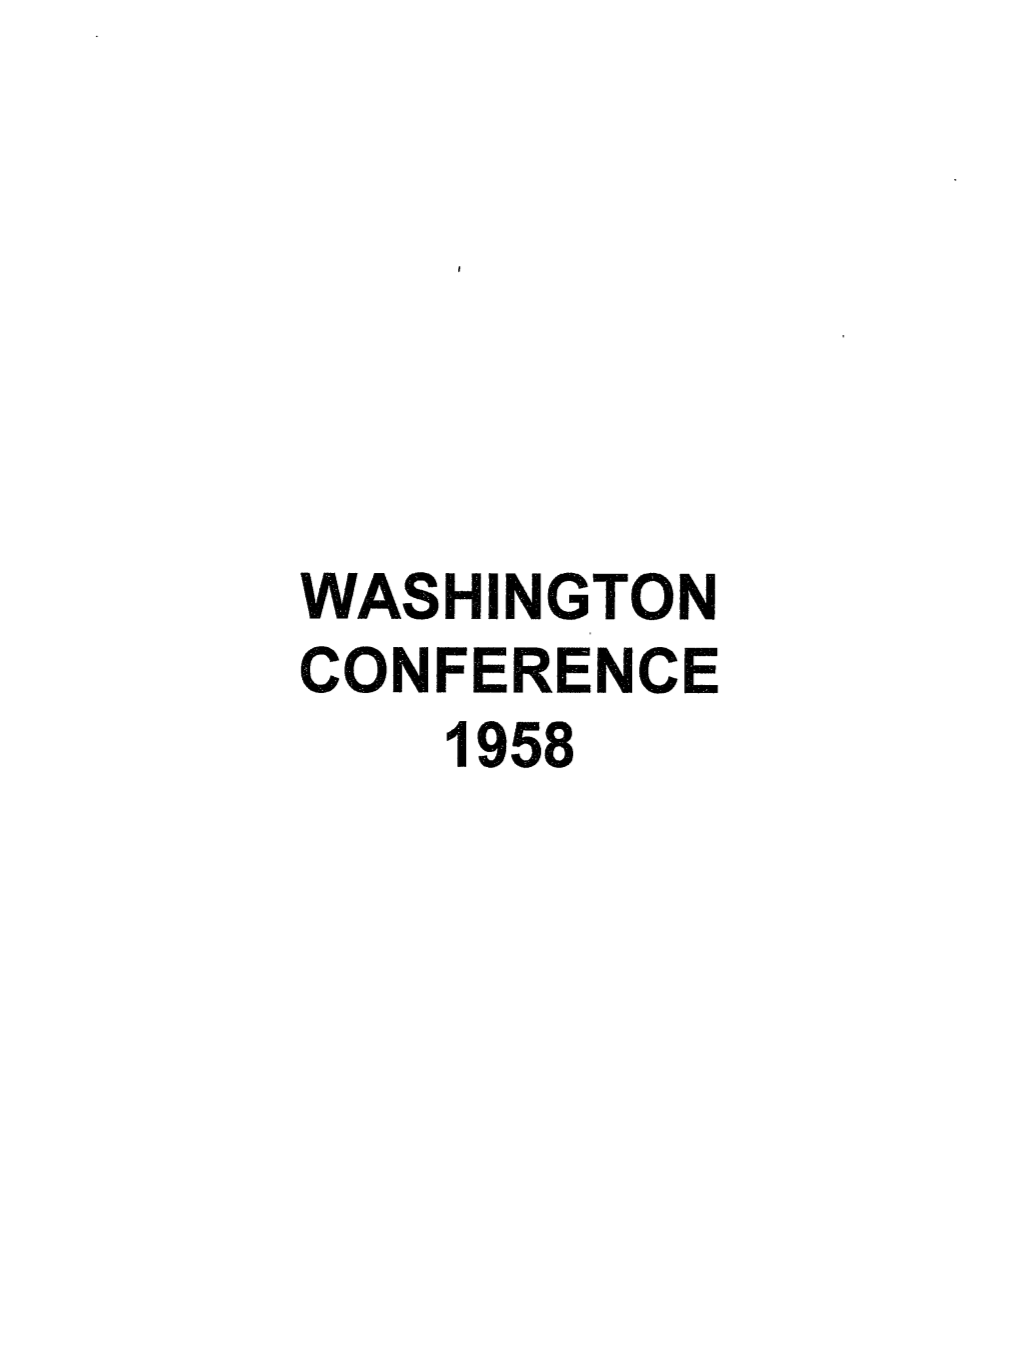 Of the Washington Annual Conference of the Methqdist Church